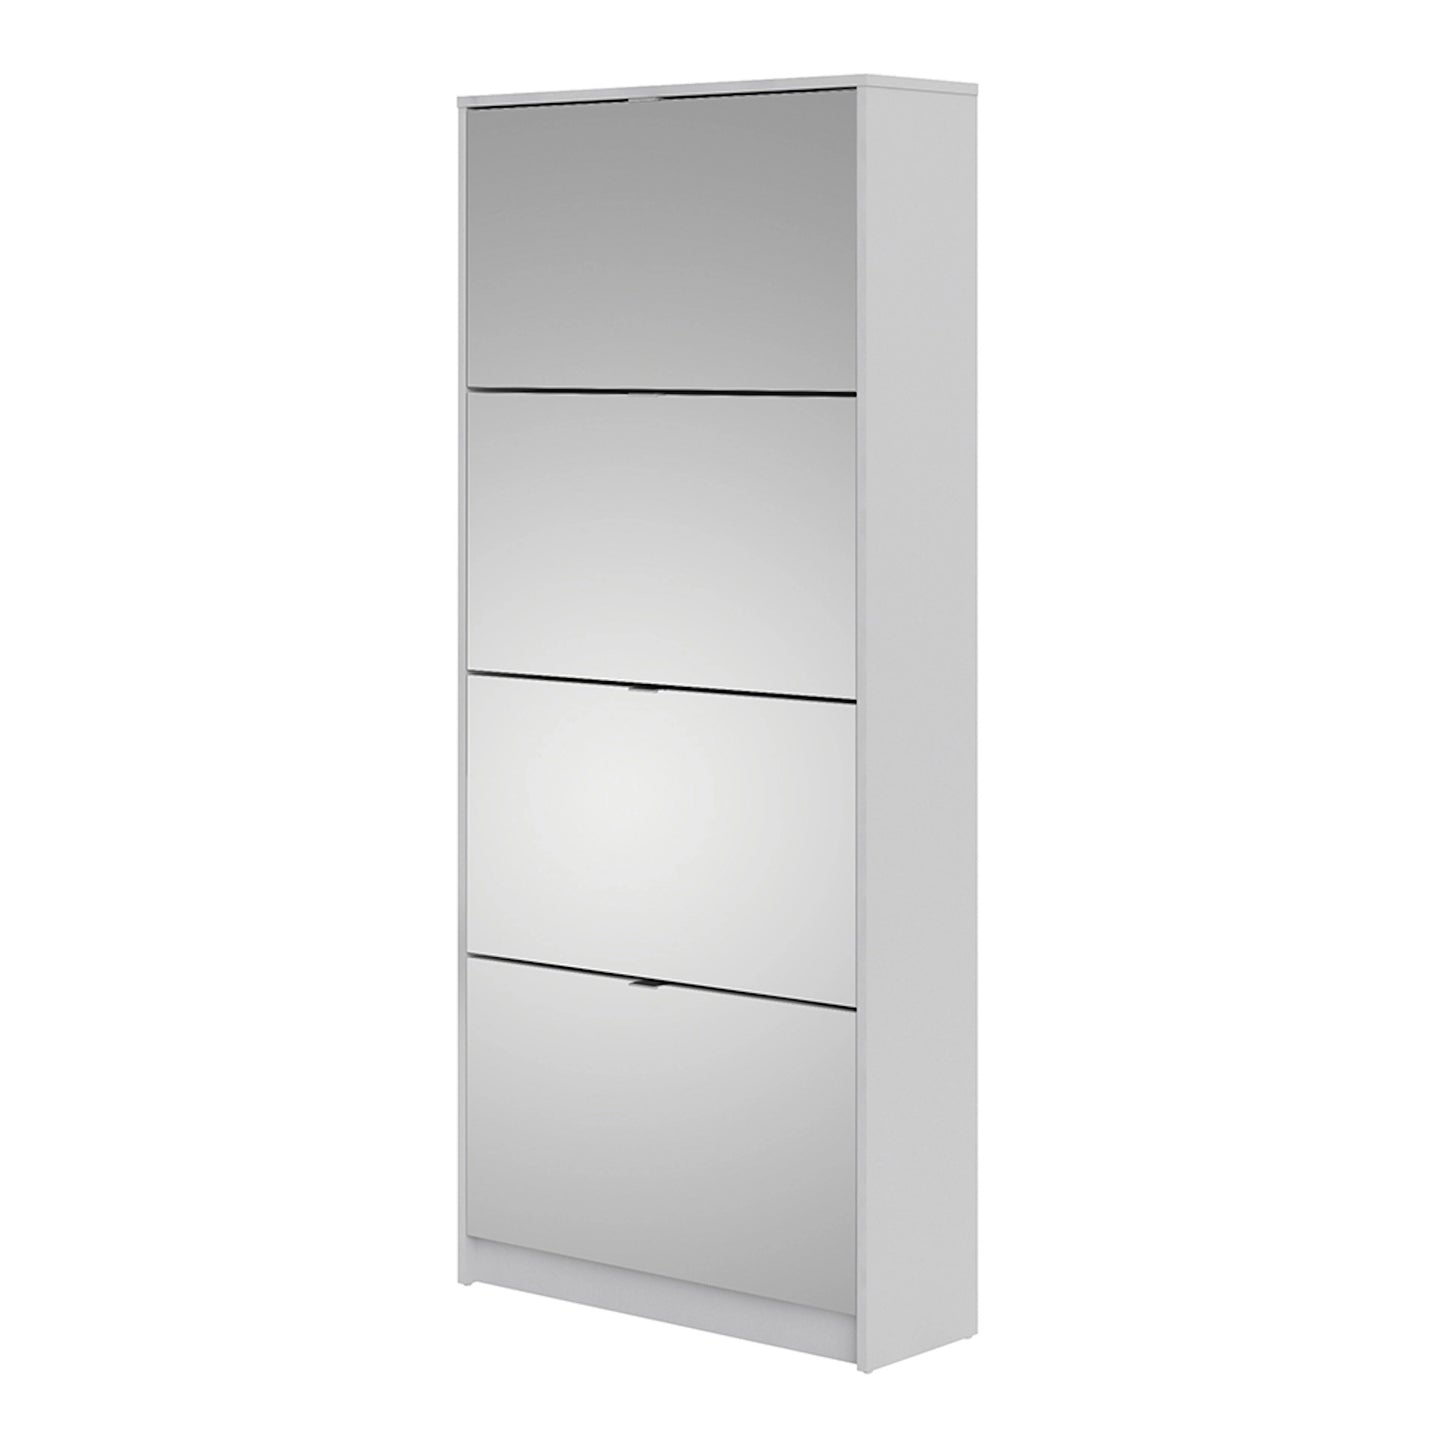 Furniture To Go Shoes Shoe Cabinet W. 4 Mirror Tilting Doors & 2 Layers in White